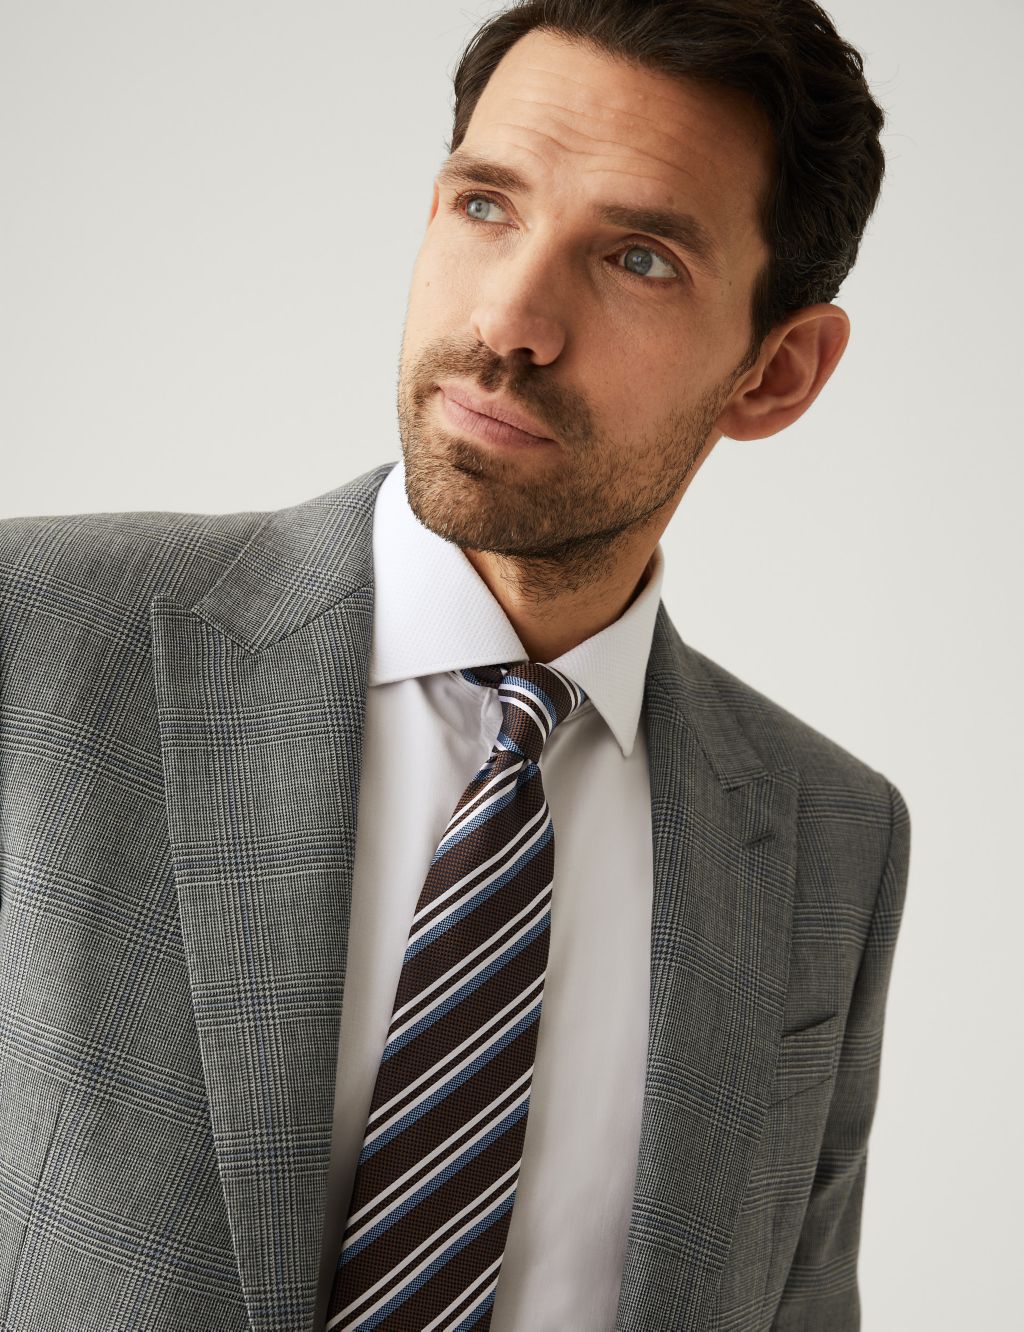 Regular Fit Pure Wool Check Suit Jacket image 3